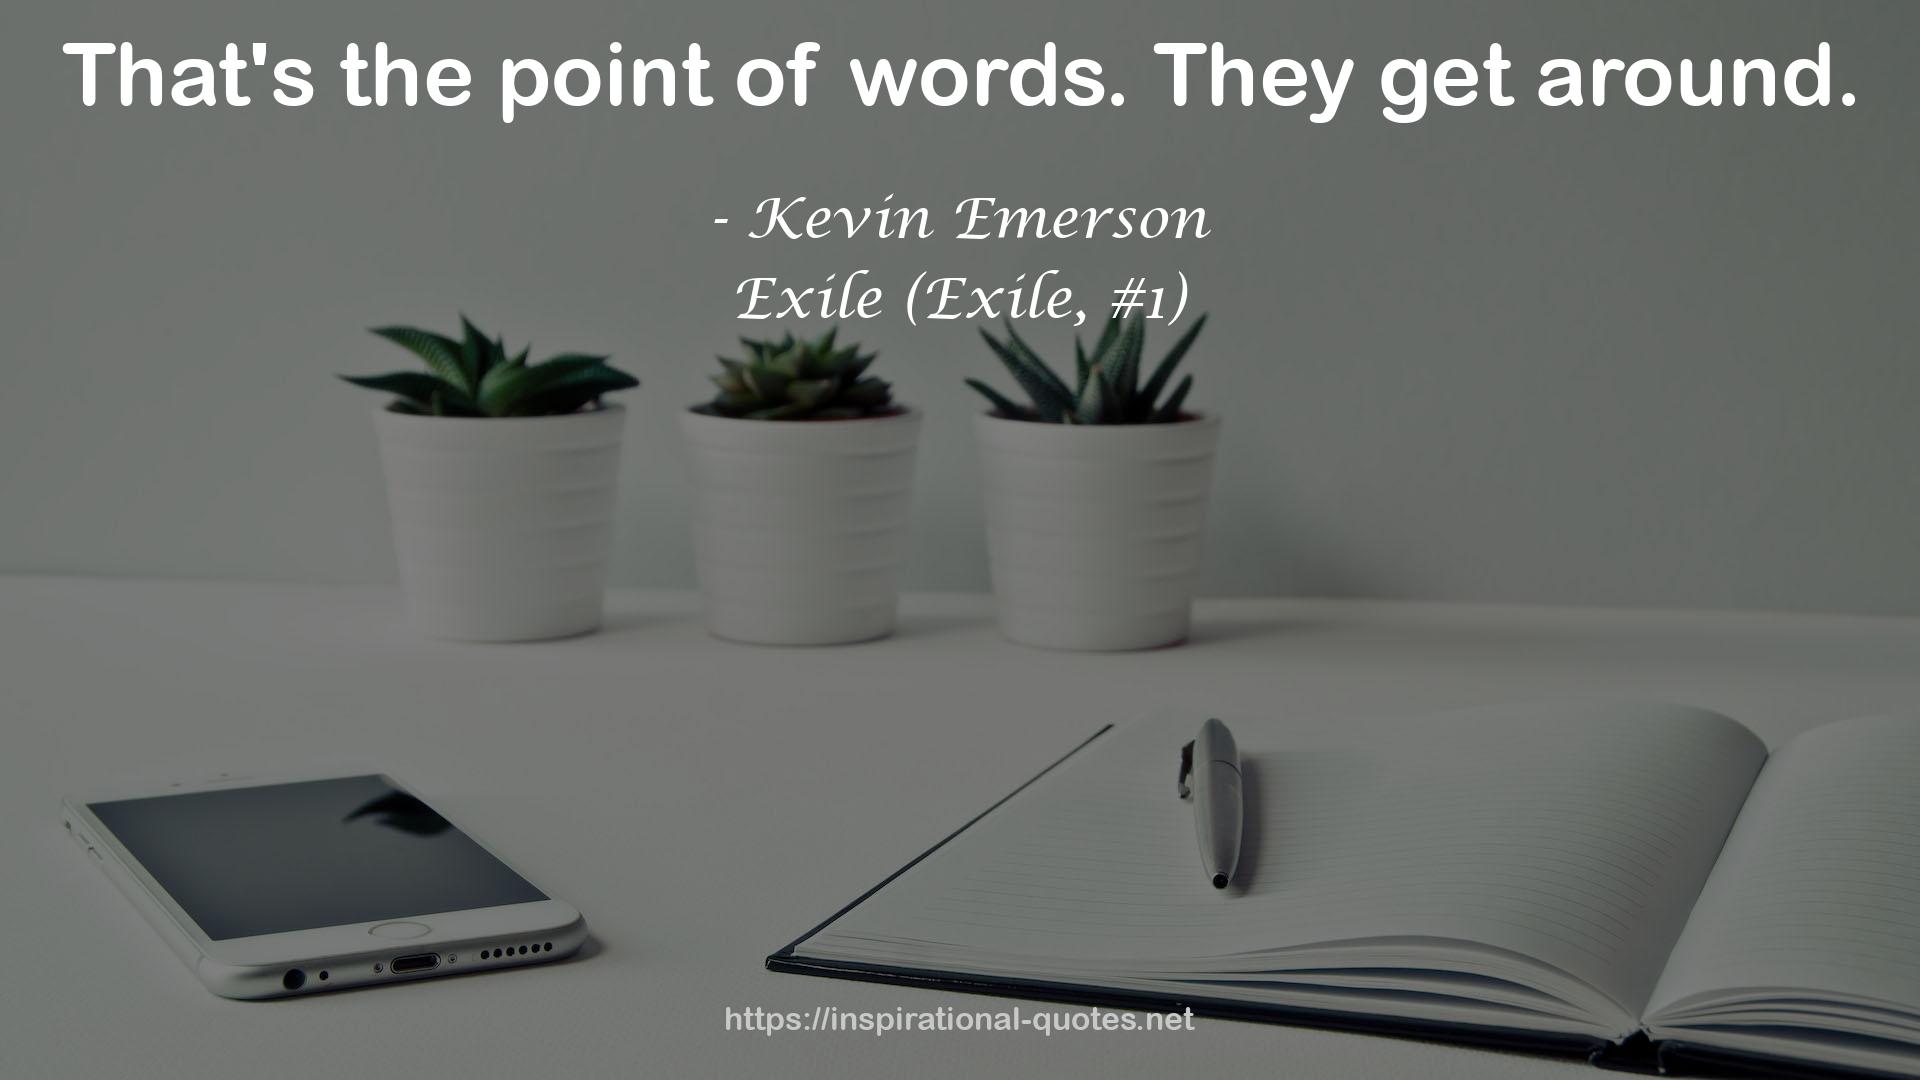 Kevin Emerson QUOTES